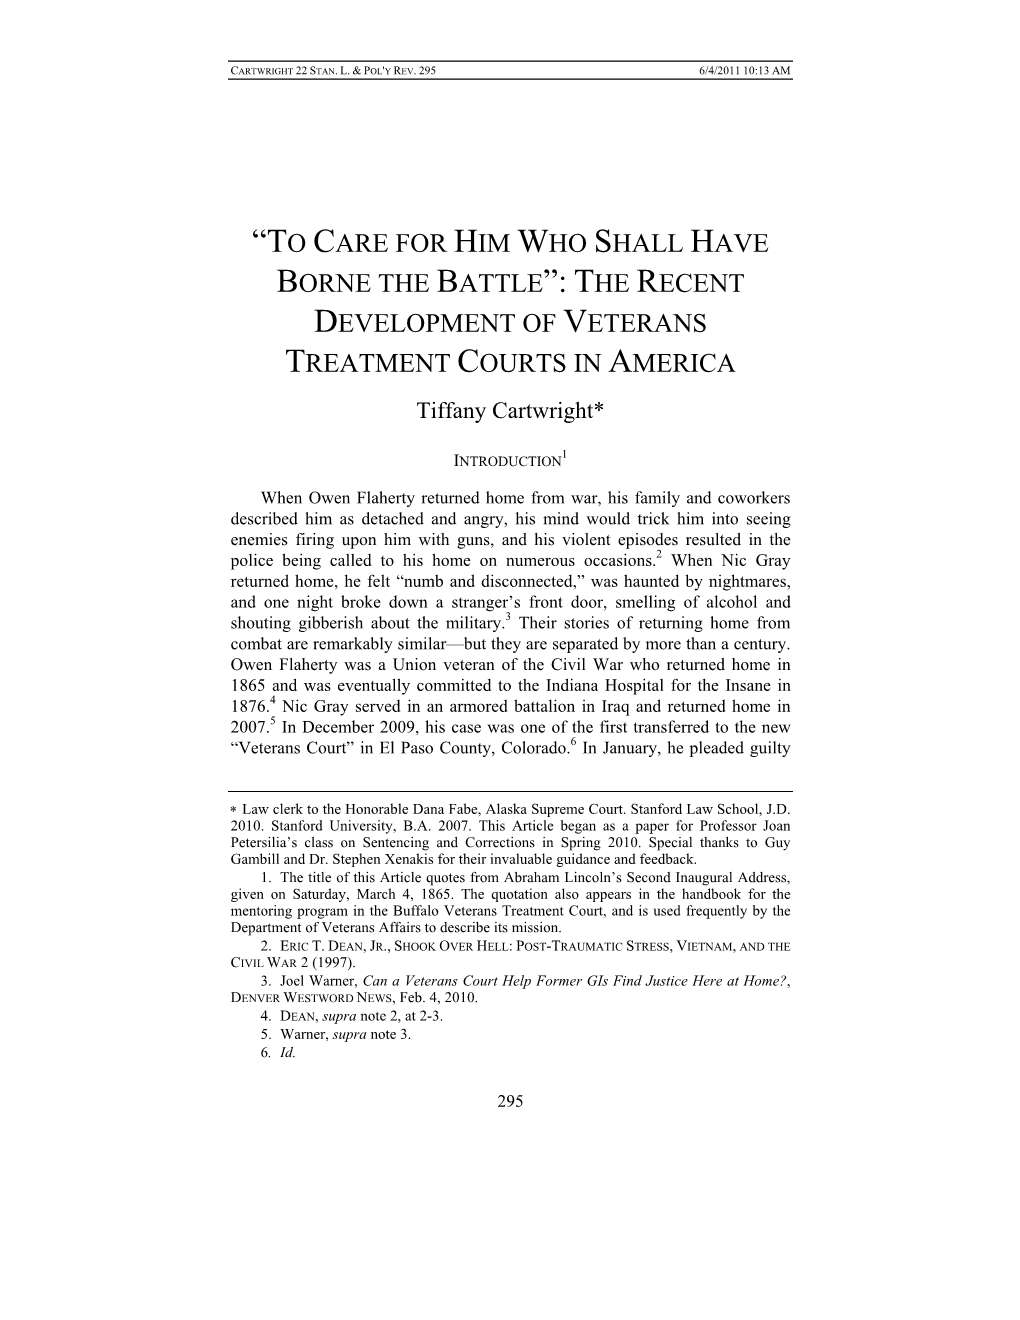 THE RECENT DEVELOPMENT of VETERANS TREATMENT COURTS in AMERICA Tiffany Cartwright*